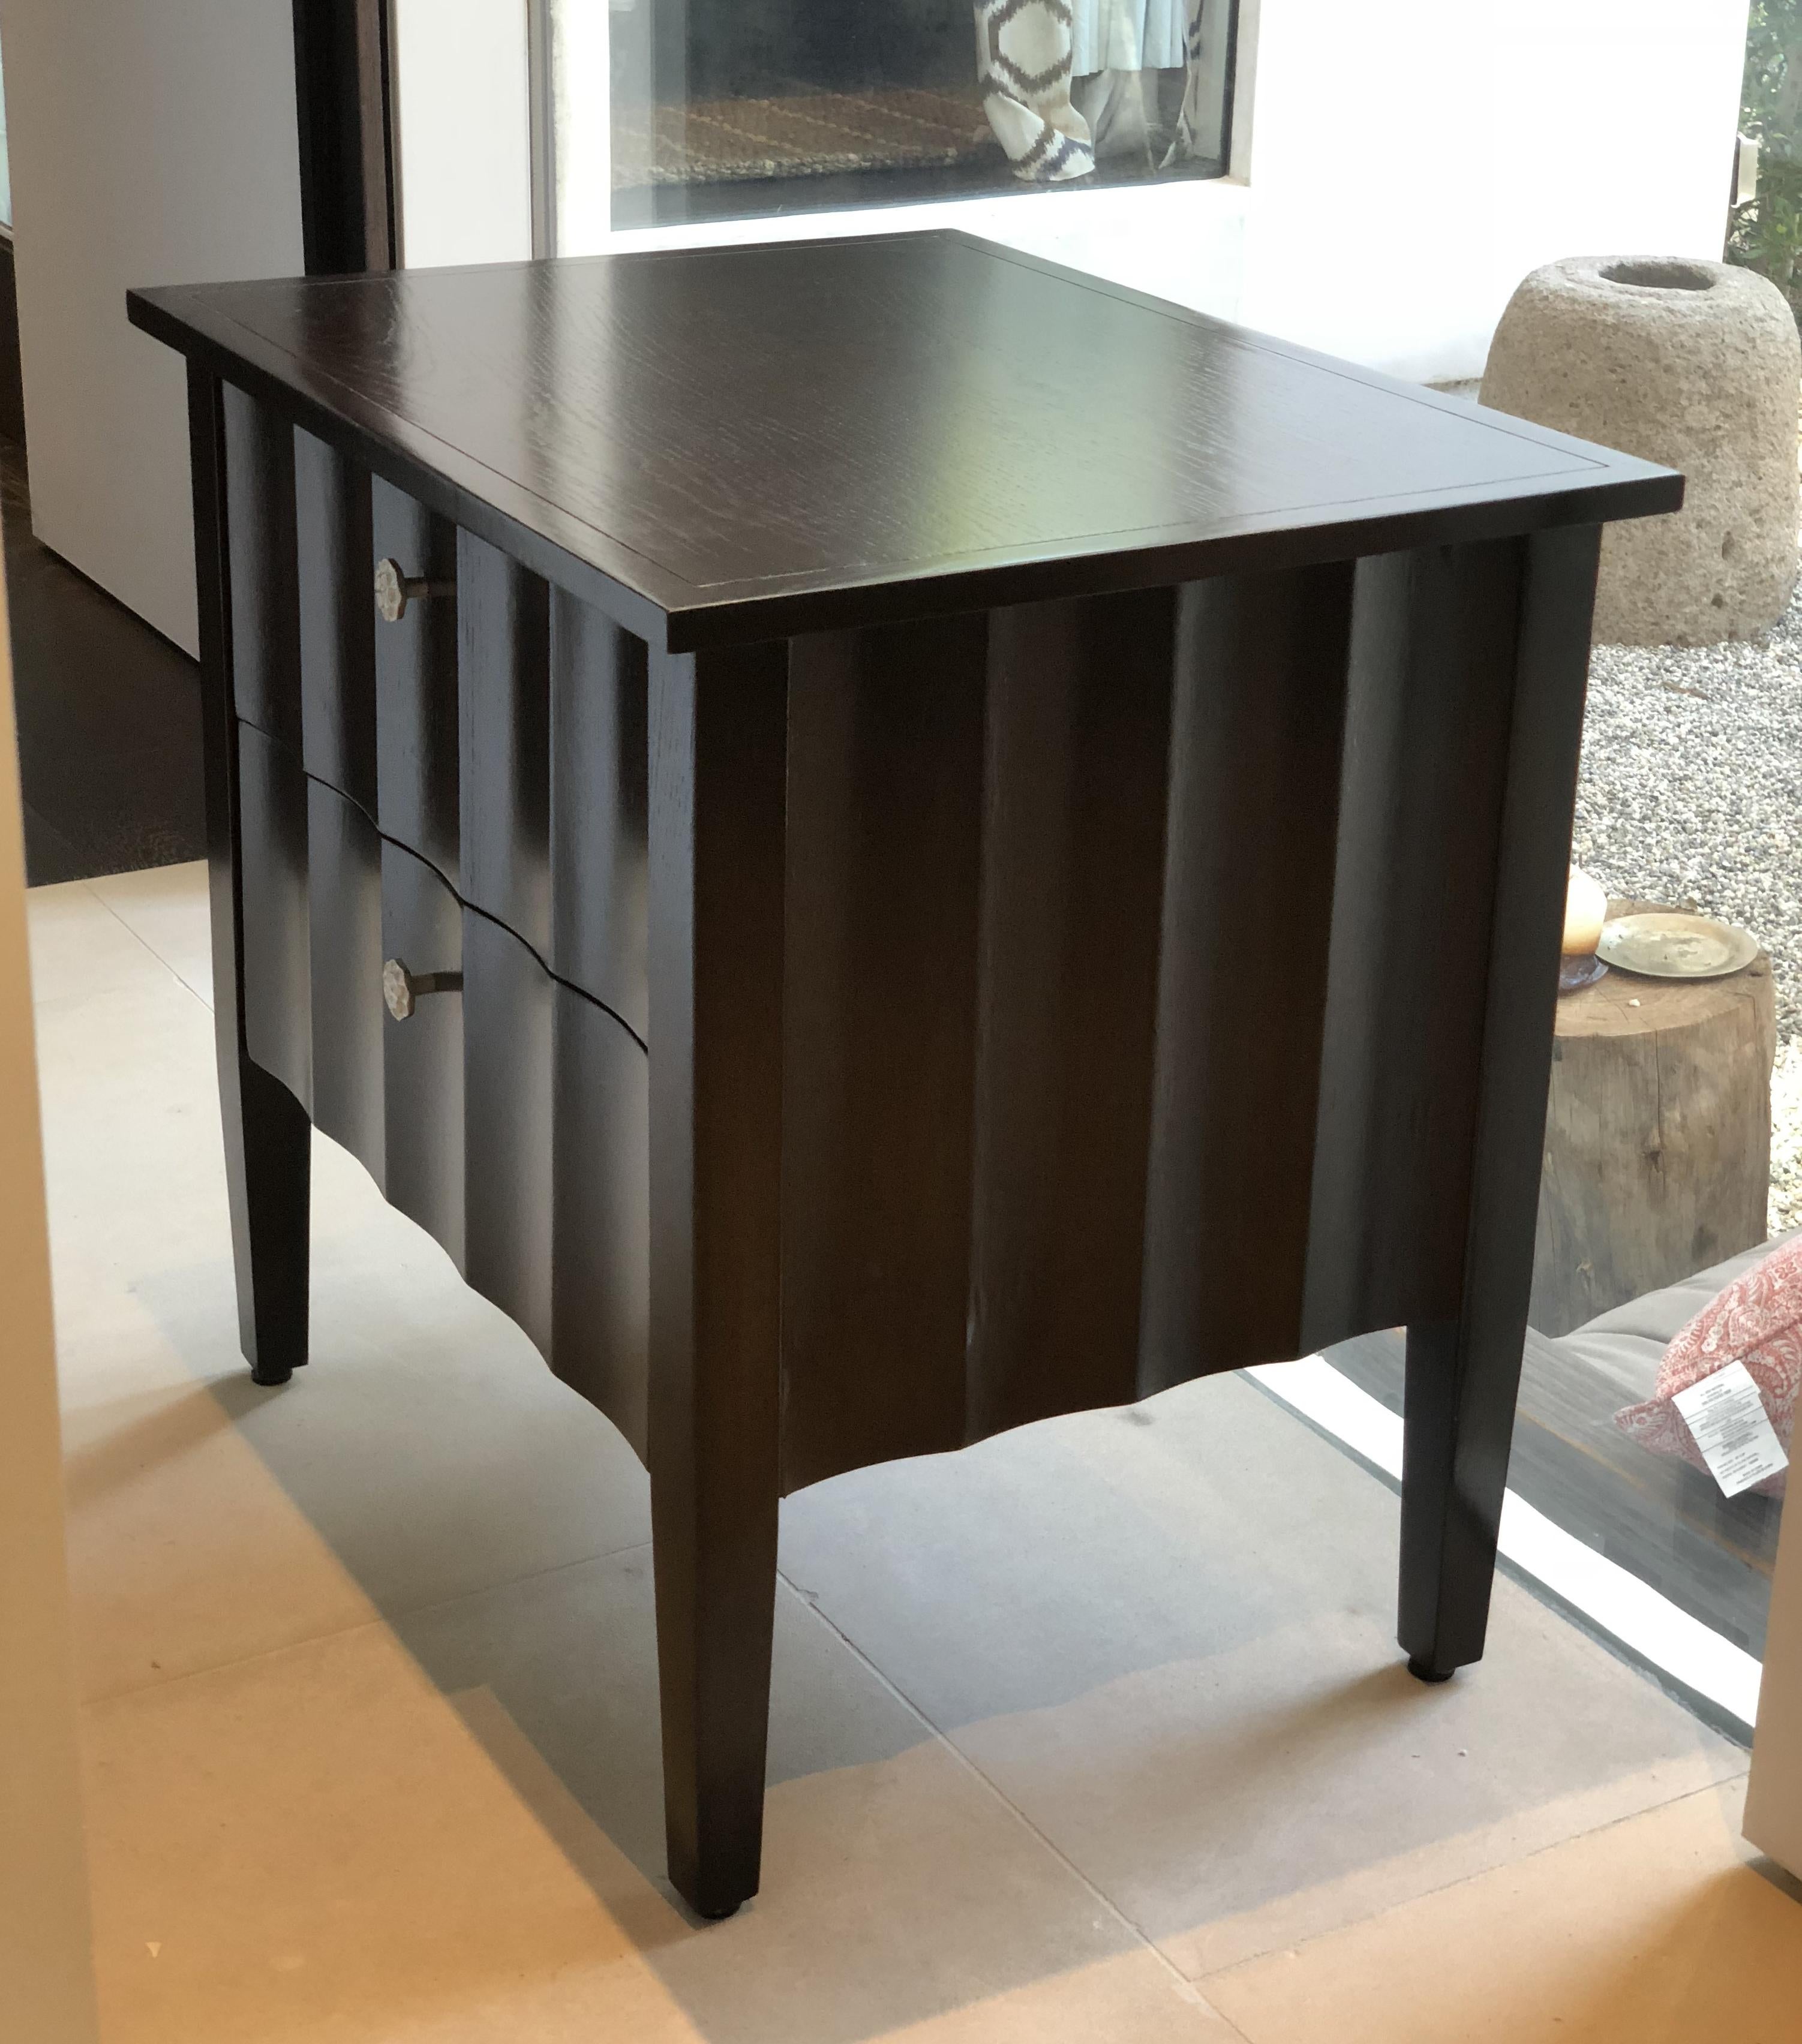 Contemporary Modern Chocolate Brown Nightstands with Scalloped Detail on Drawers and Sides